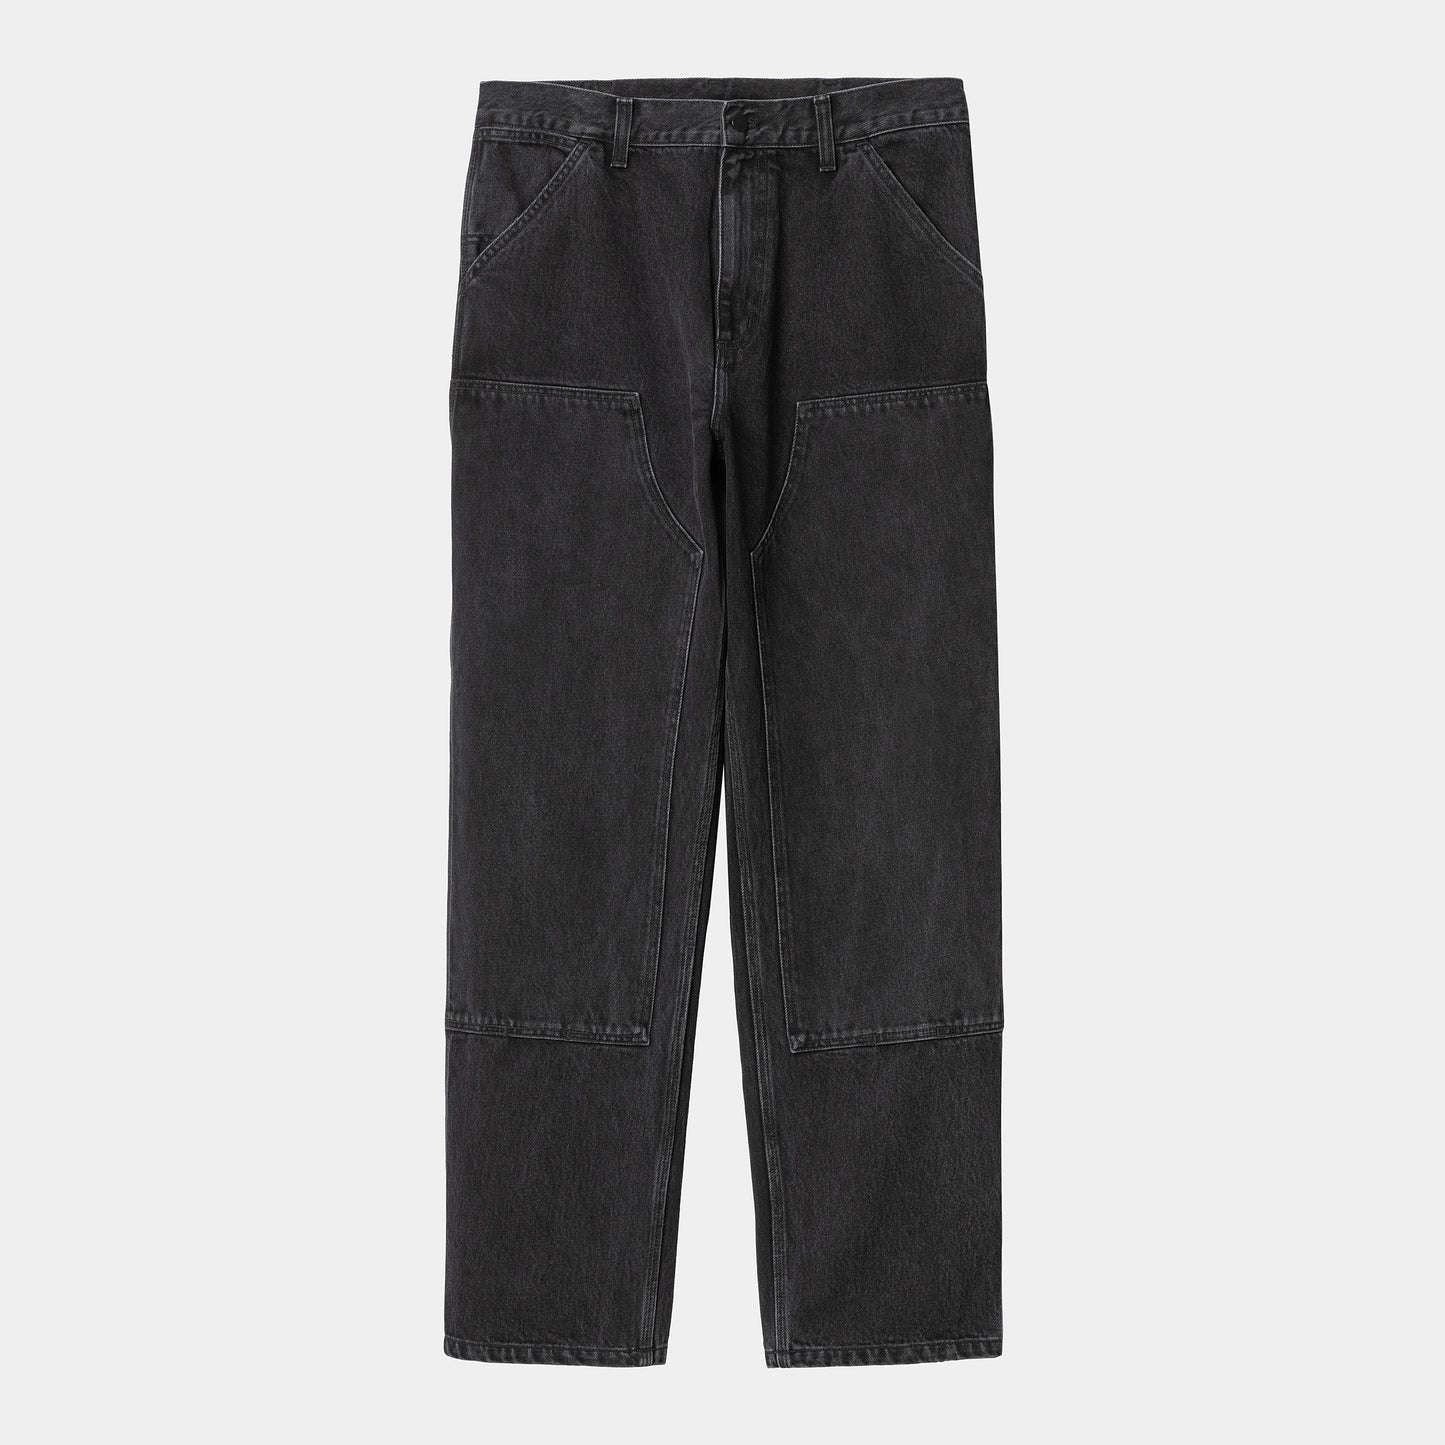 Carhartt - Double Knee Pant Black Stone Washed